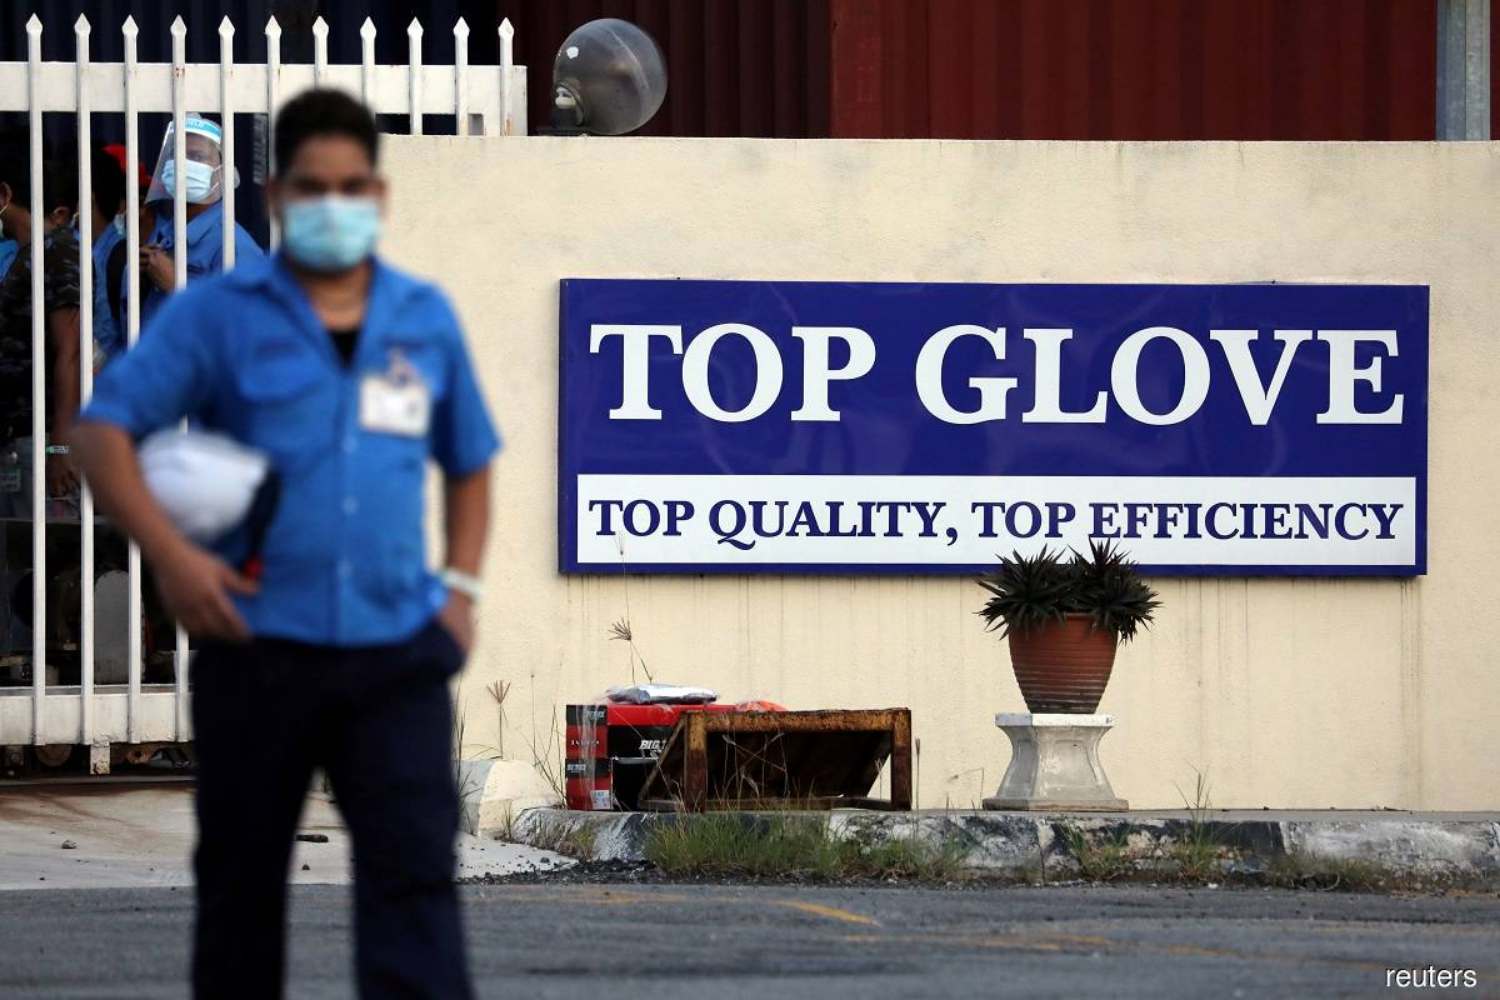 MIDF Research cuts Top Glove target price to RM8.29, saying major worker welfare improvements will take time